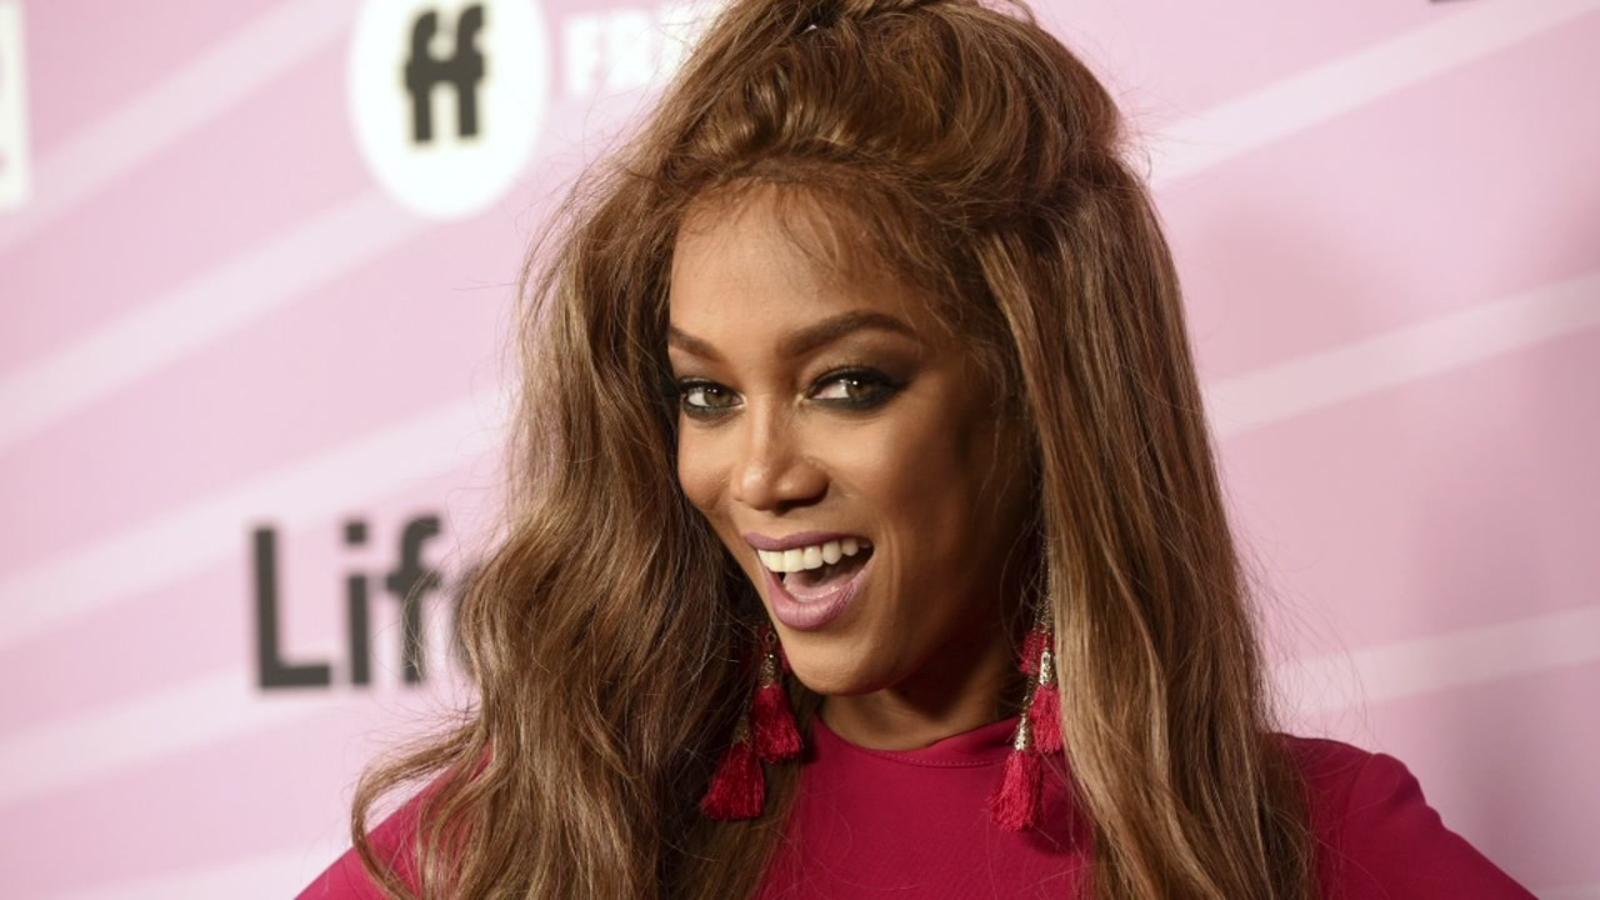 Tyra Banks plans to open amusement park called 'Modelland' in Los